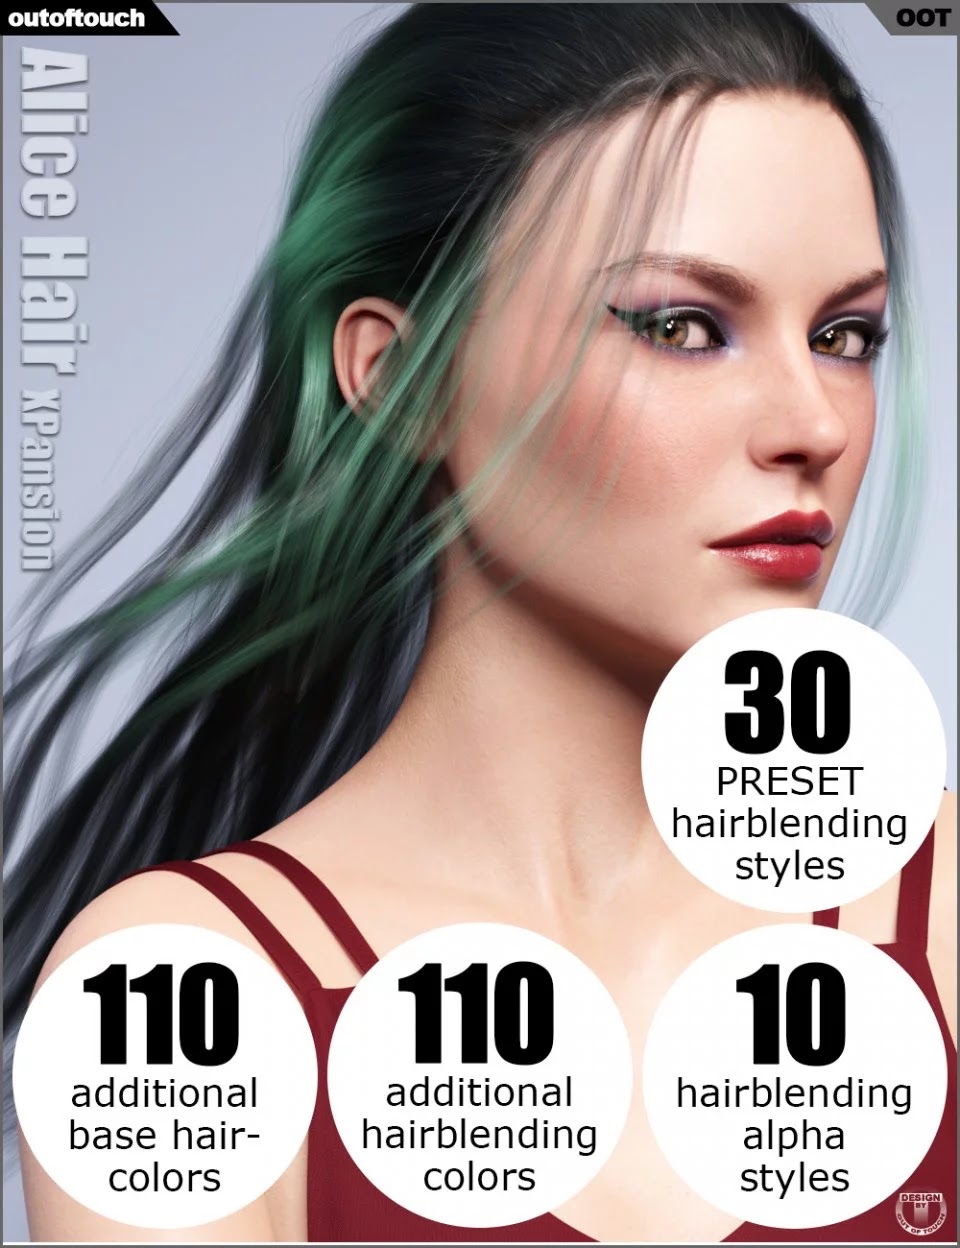 OOT Hairblending 2.0 Texture XPansion for Alice Wet and Dry Hair_DAZ3D下载站